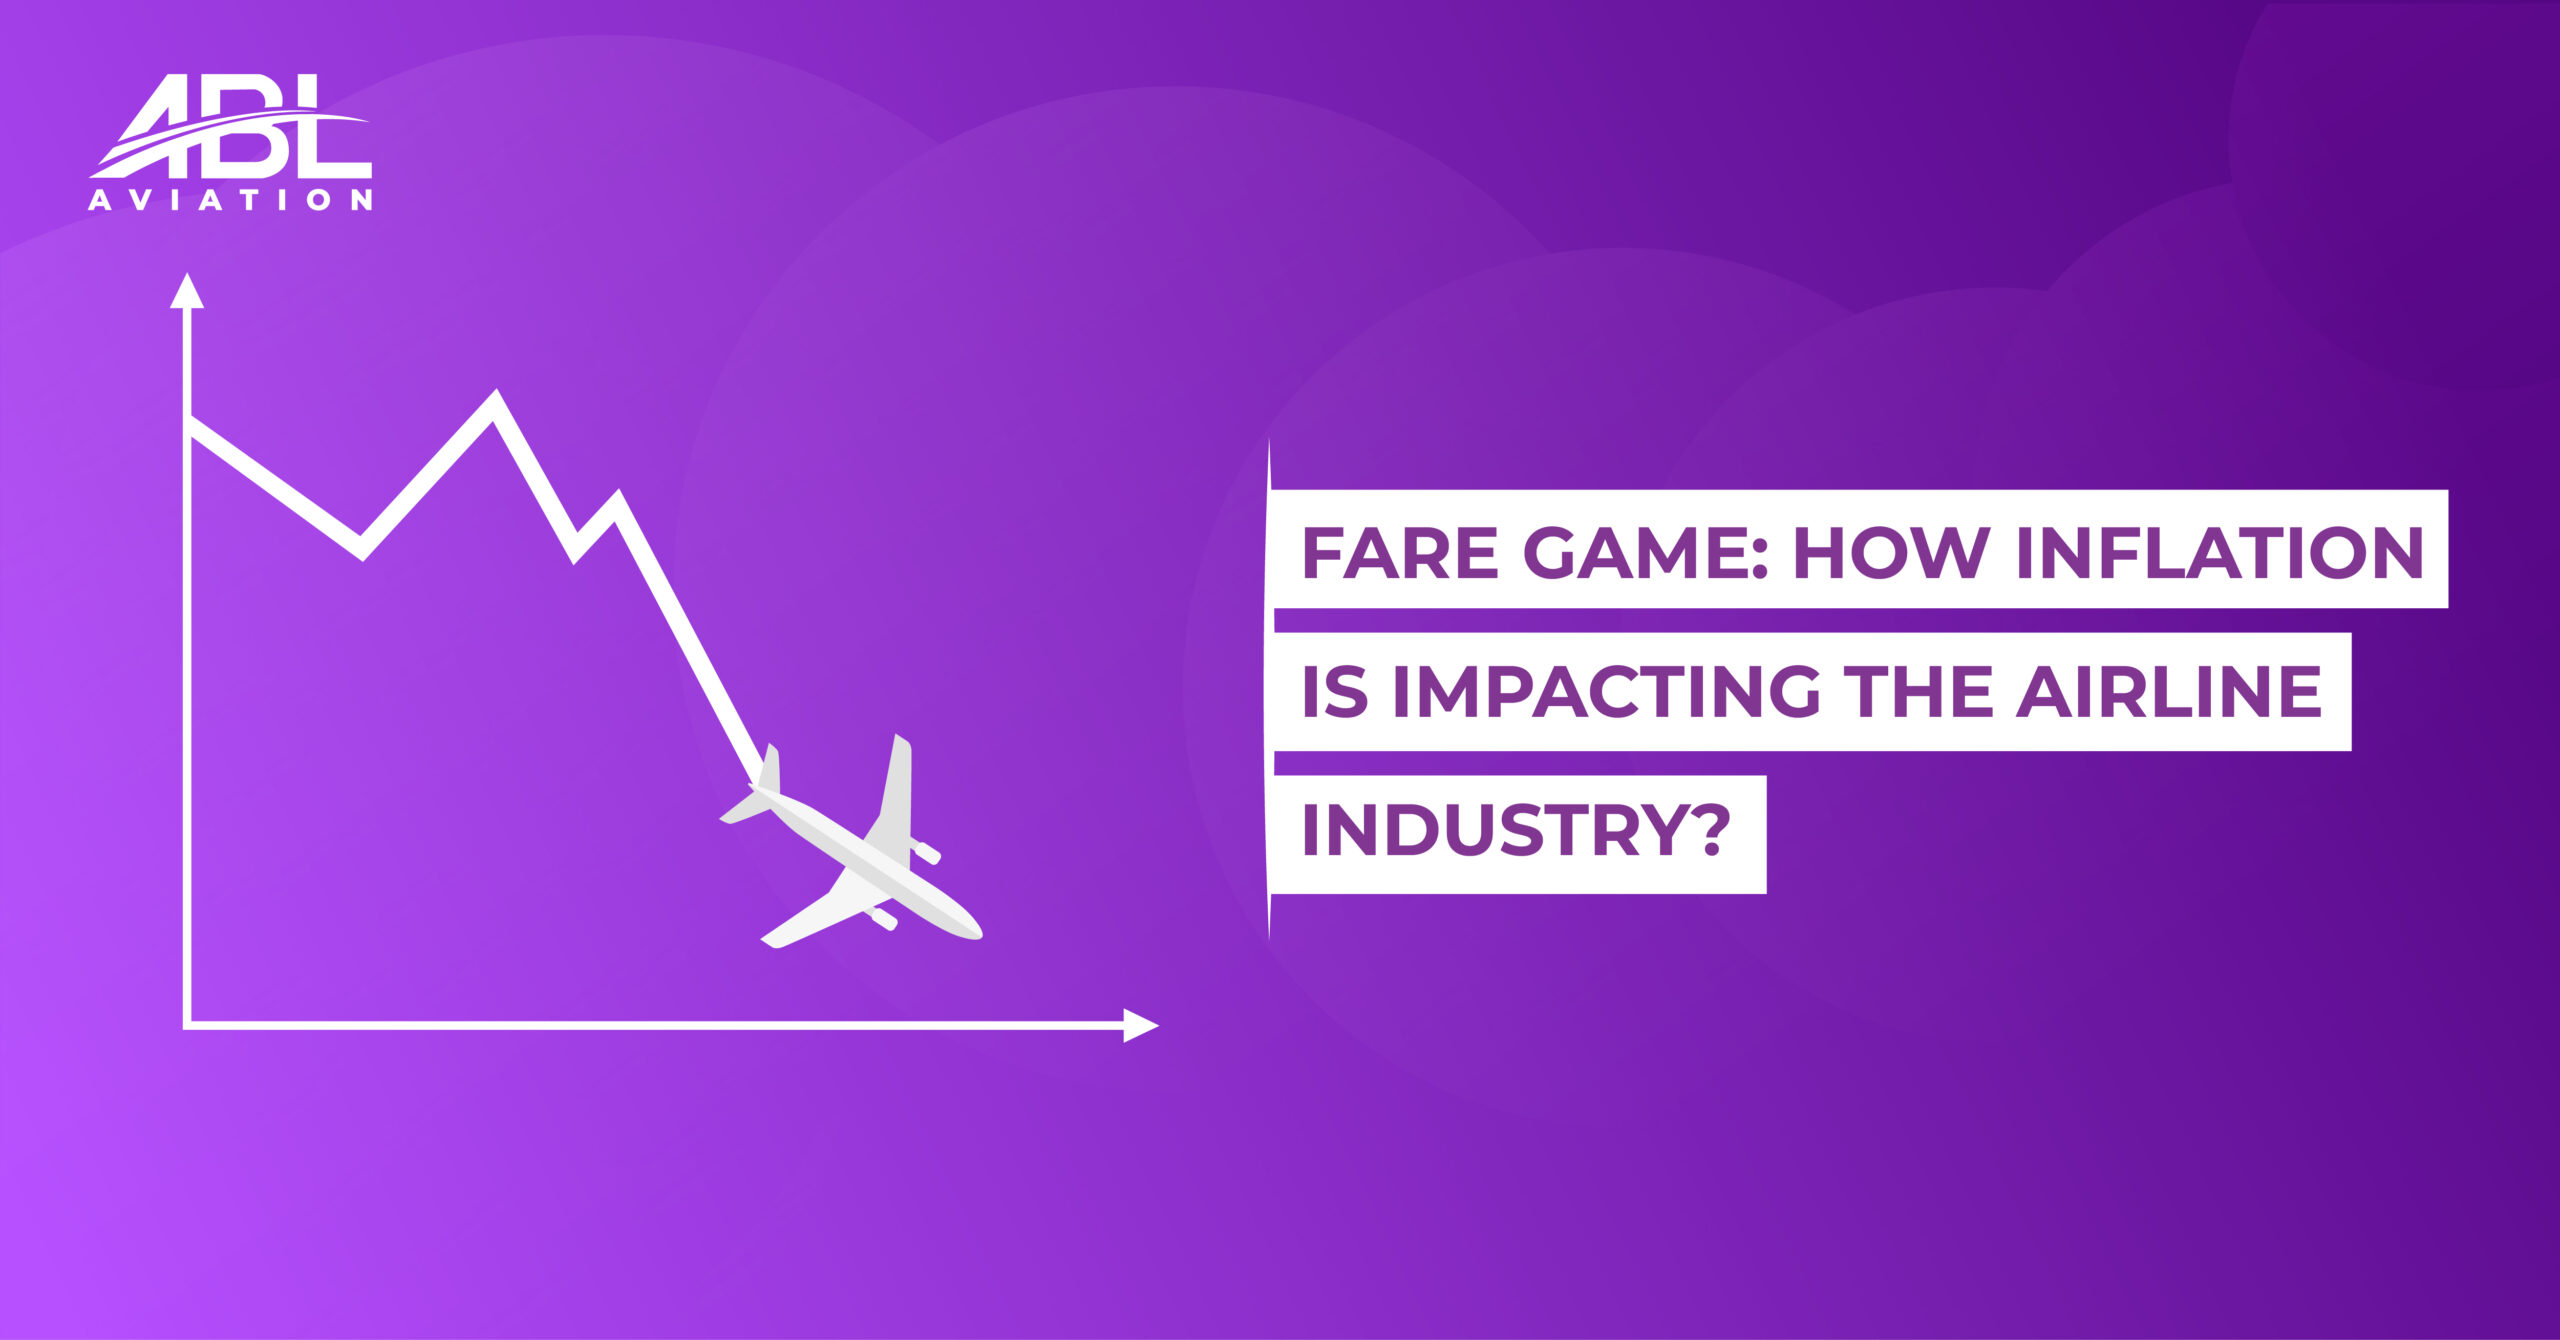 ABL Aviation Releases the October 2022 Insights Report – Fare Game: How Inflation is Impacting the Airline Industry?